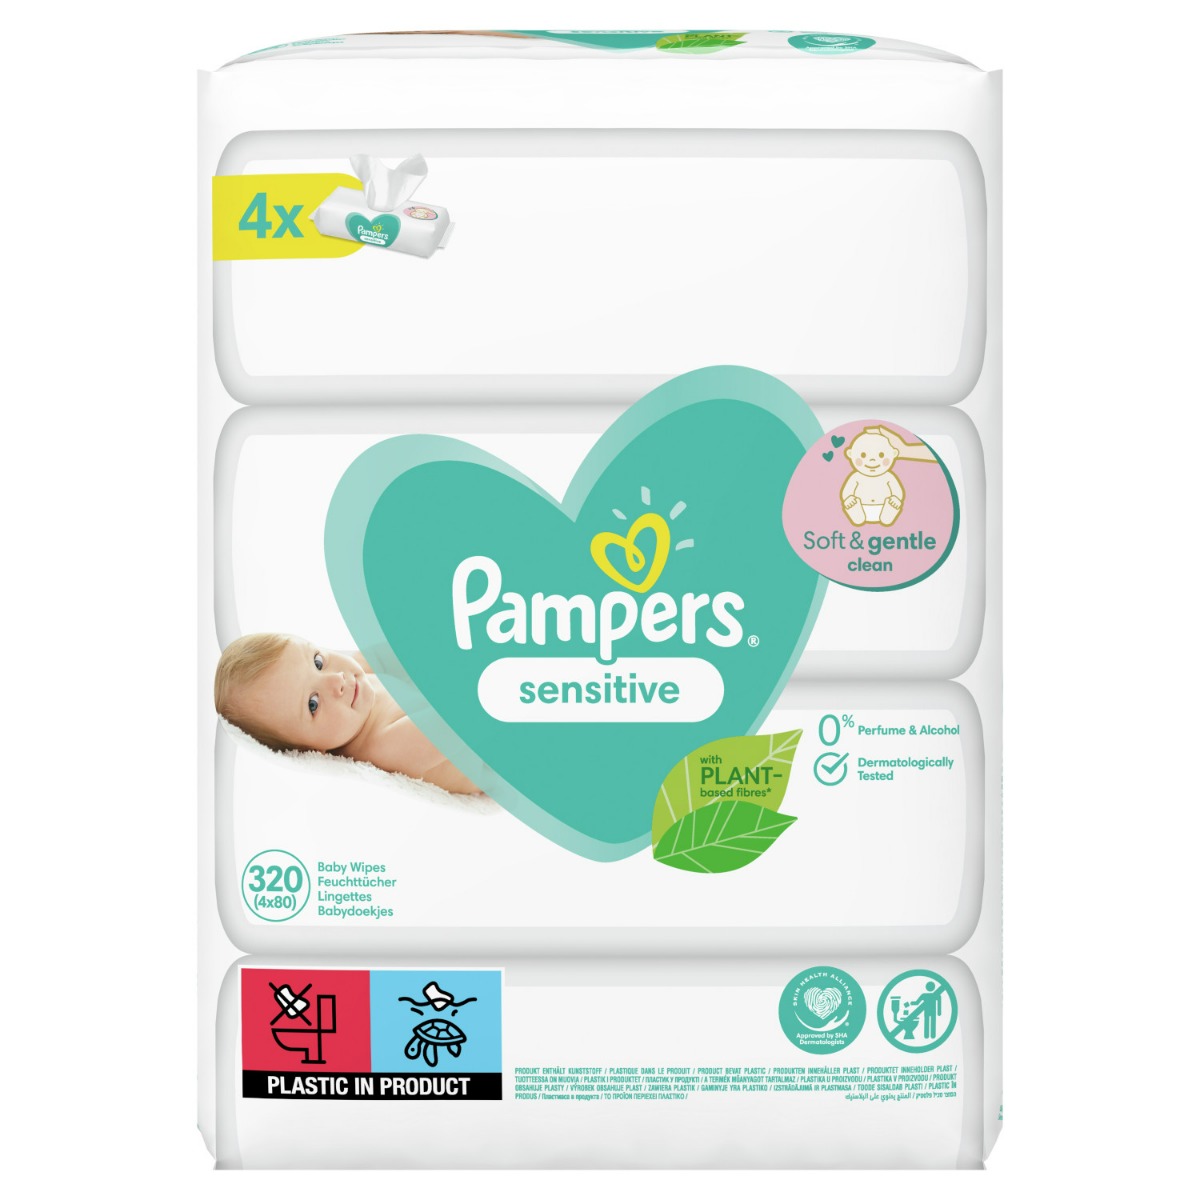 Pampers baby wipes 4x80pcs Sensitive